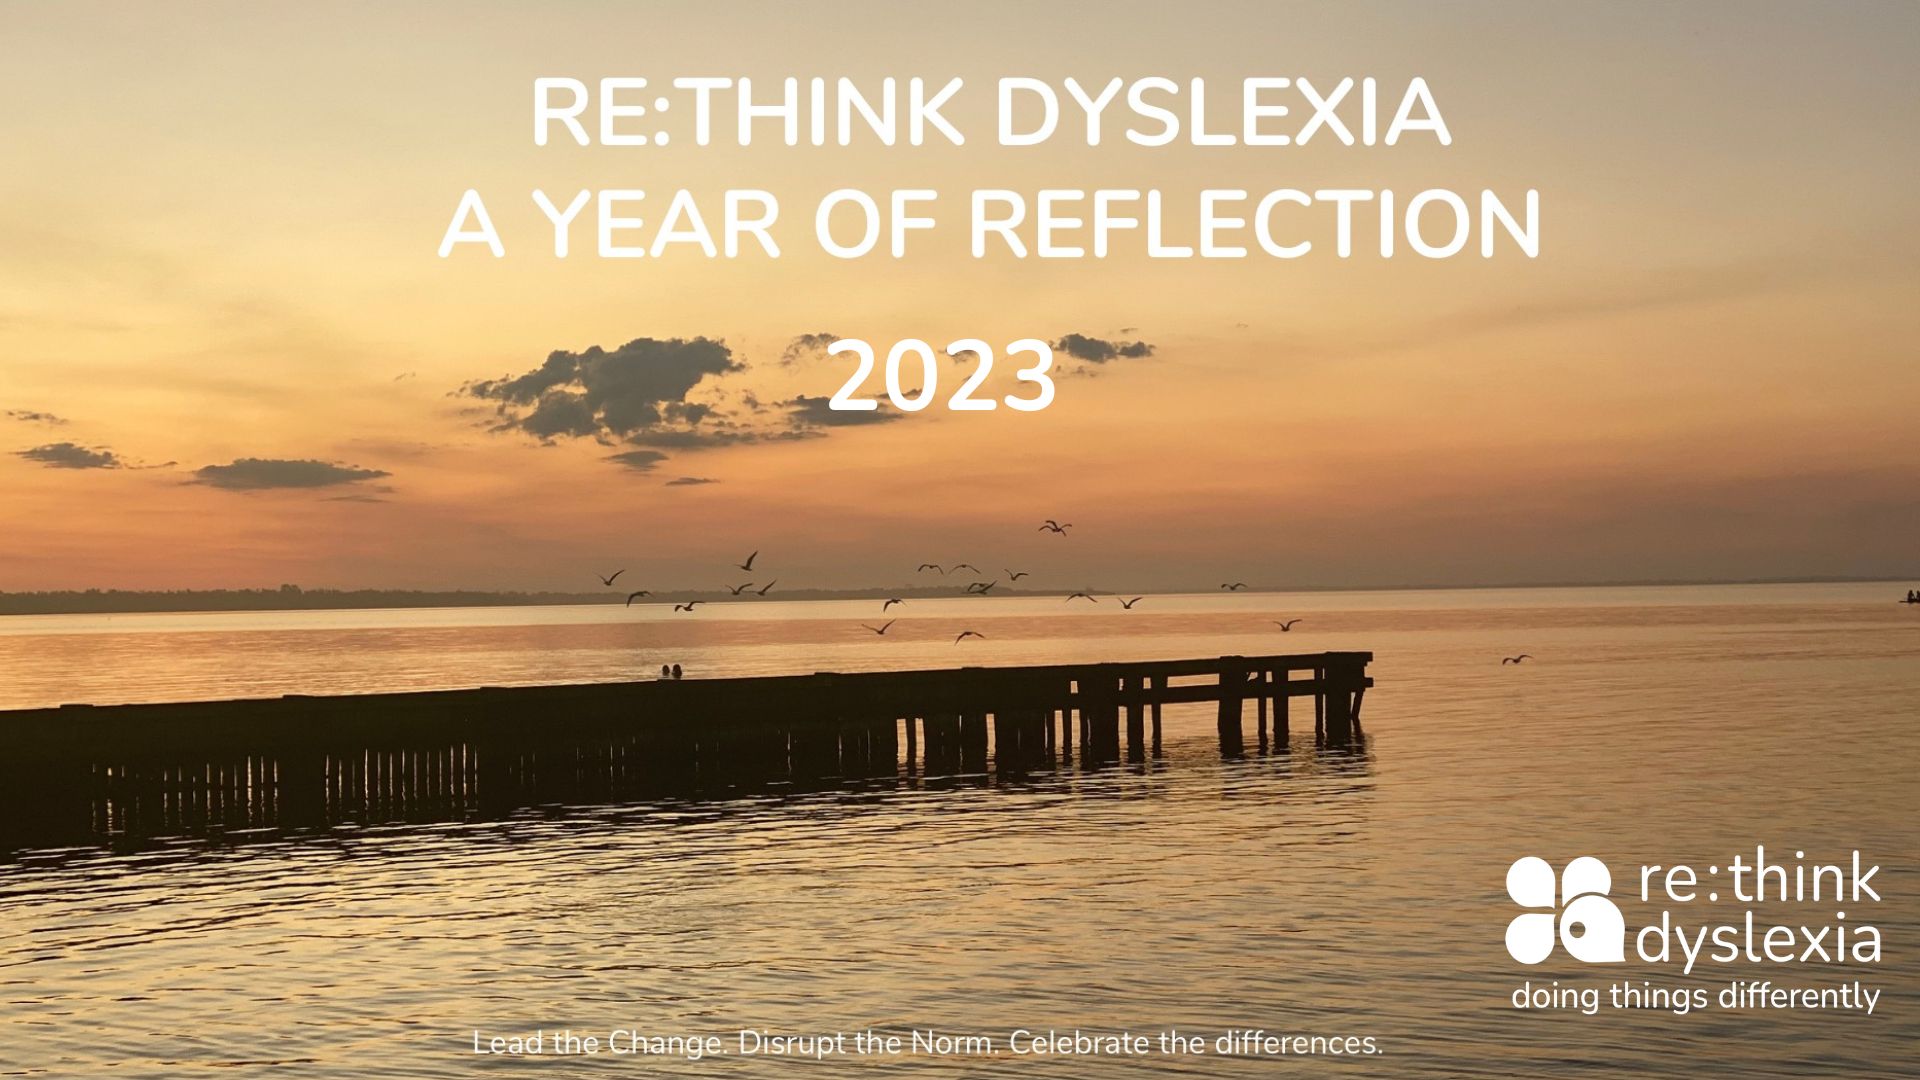 re:think dyslexia reflections 2023